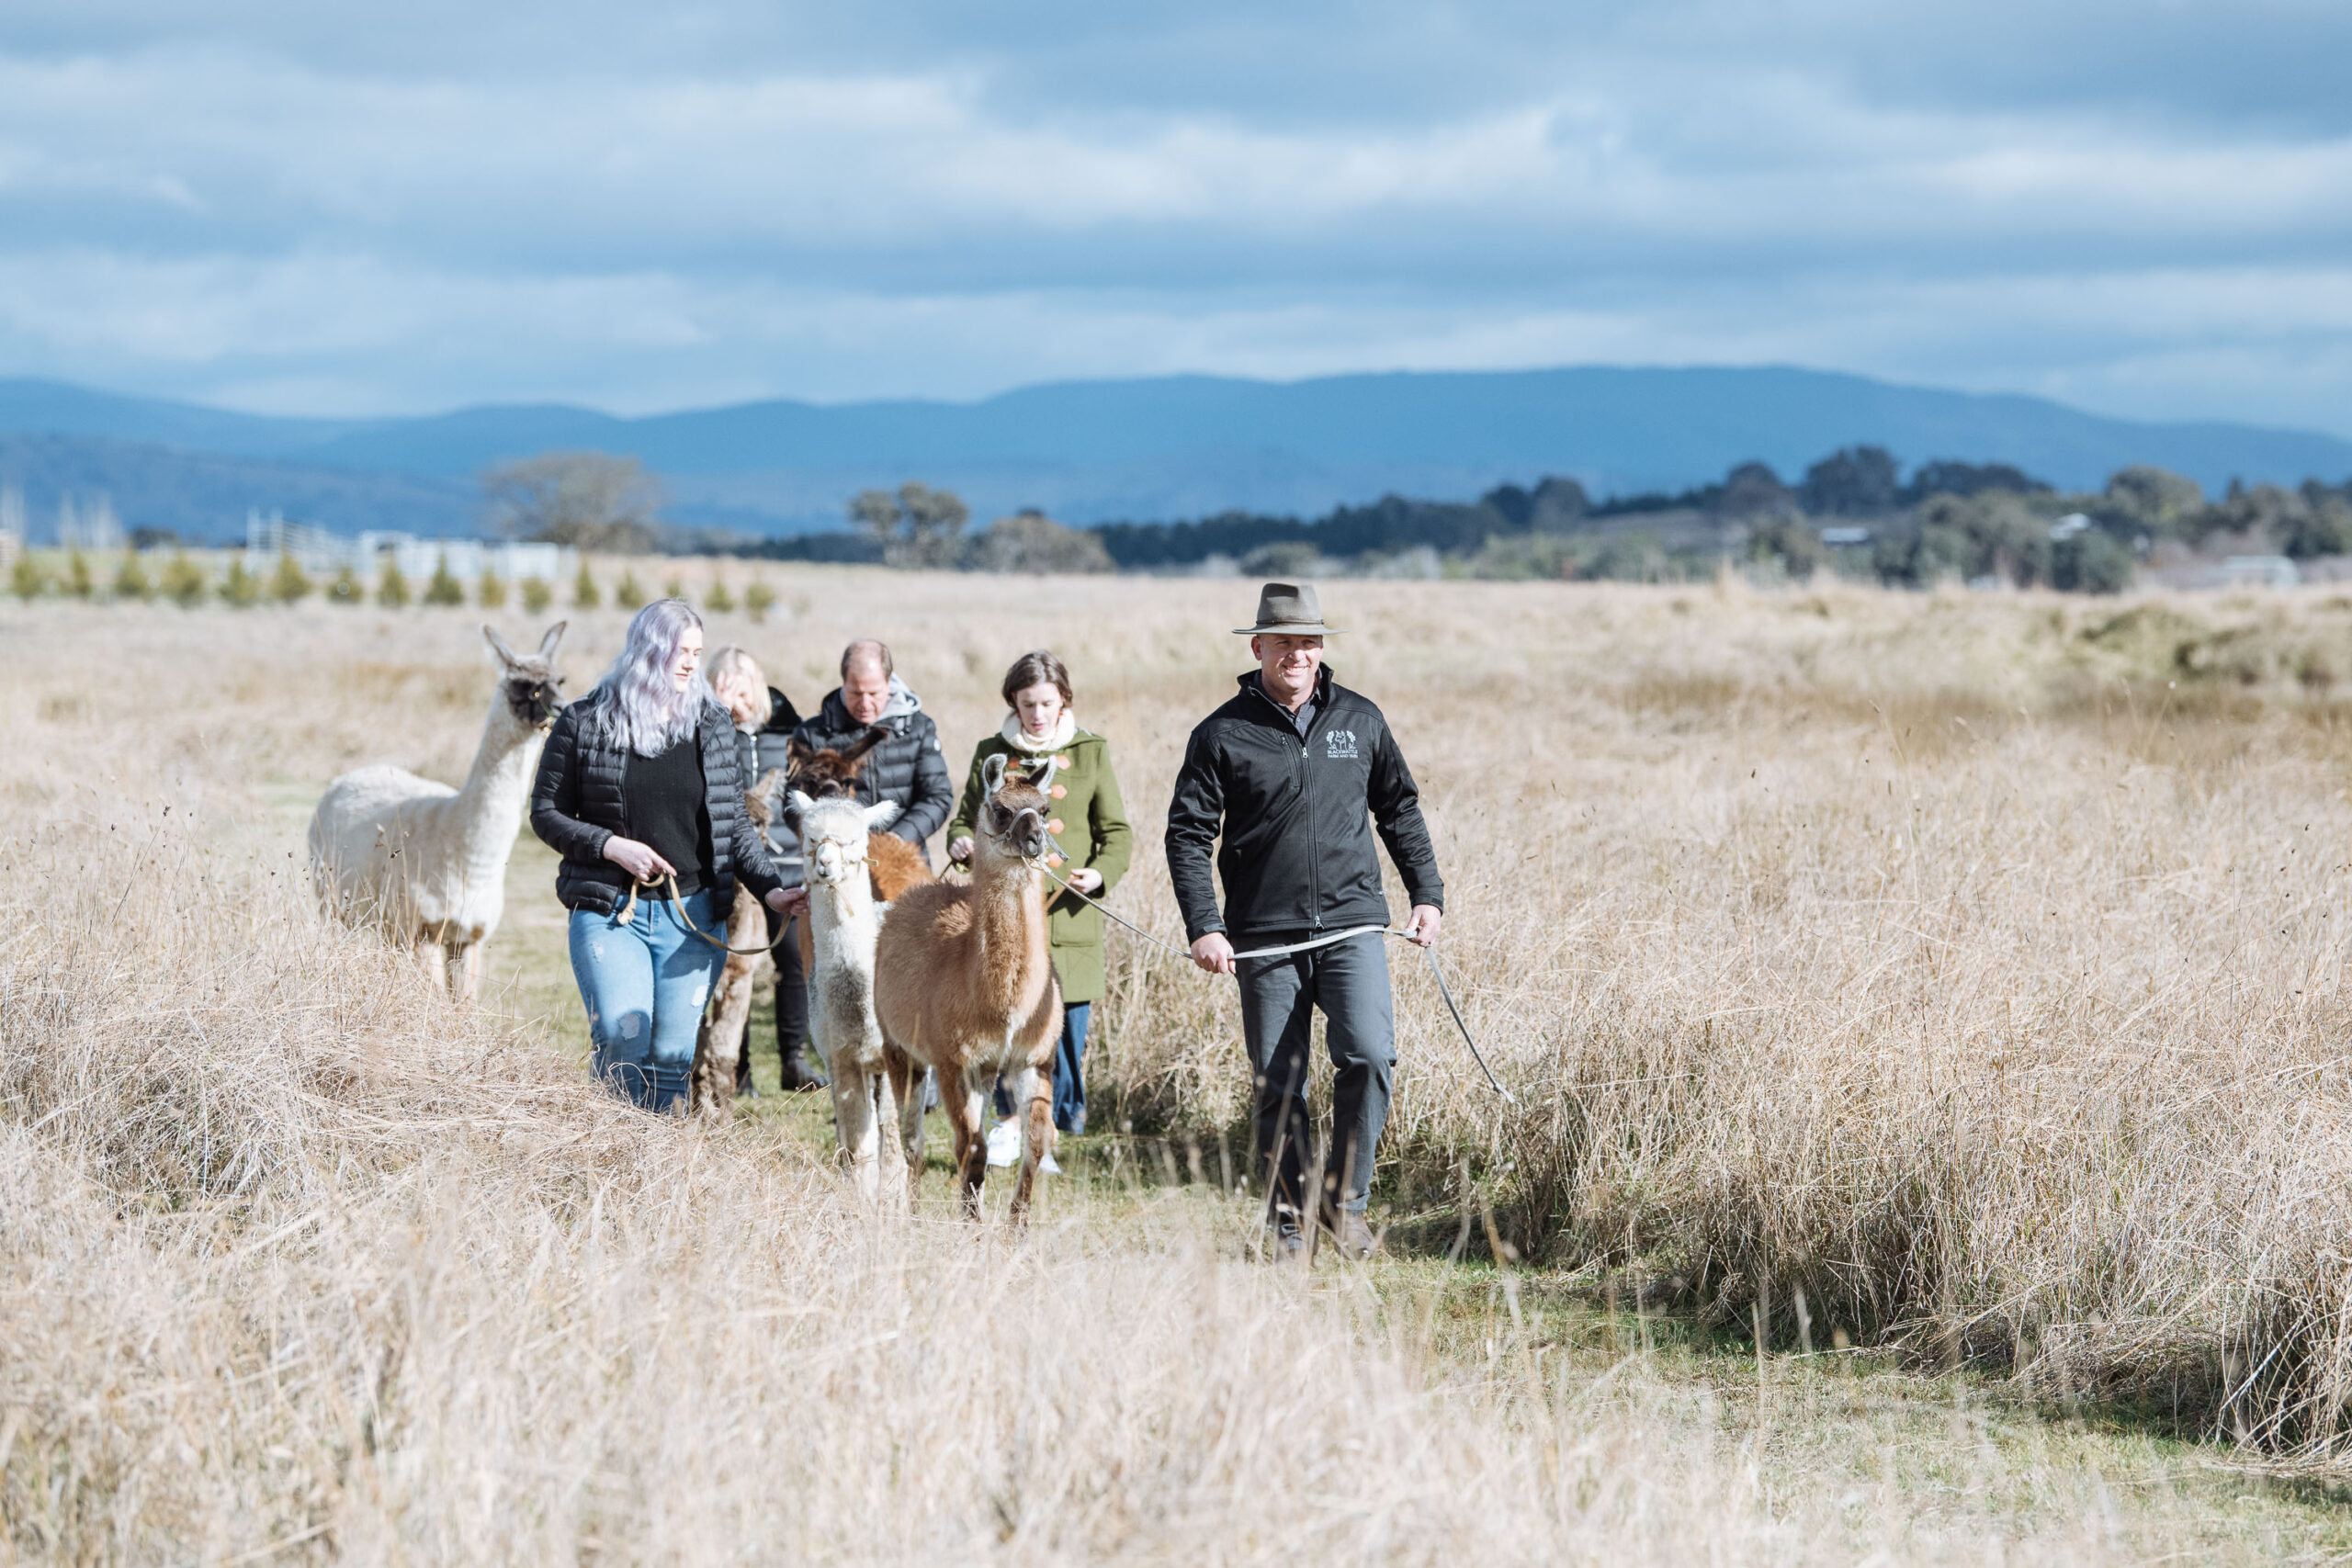 Surrounded by wineries and views of the Brindabella Range, Blackwattle Alpaca Farm offers a unique location to learn about alpacas, their luxury fibre and beautiful products. We can offer visitors an insight into farming alpacas in Australia.